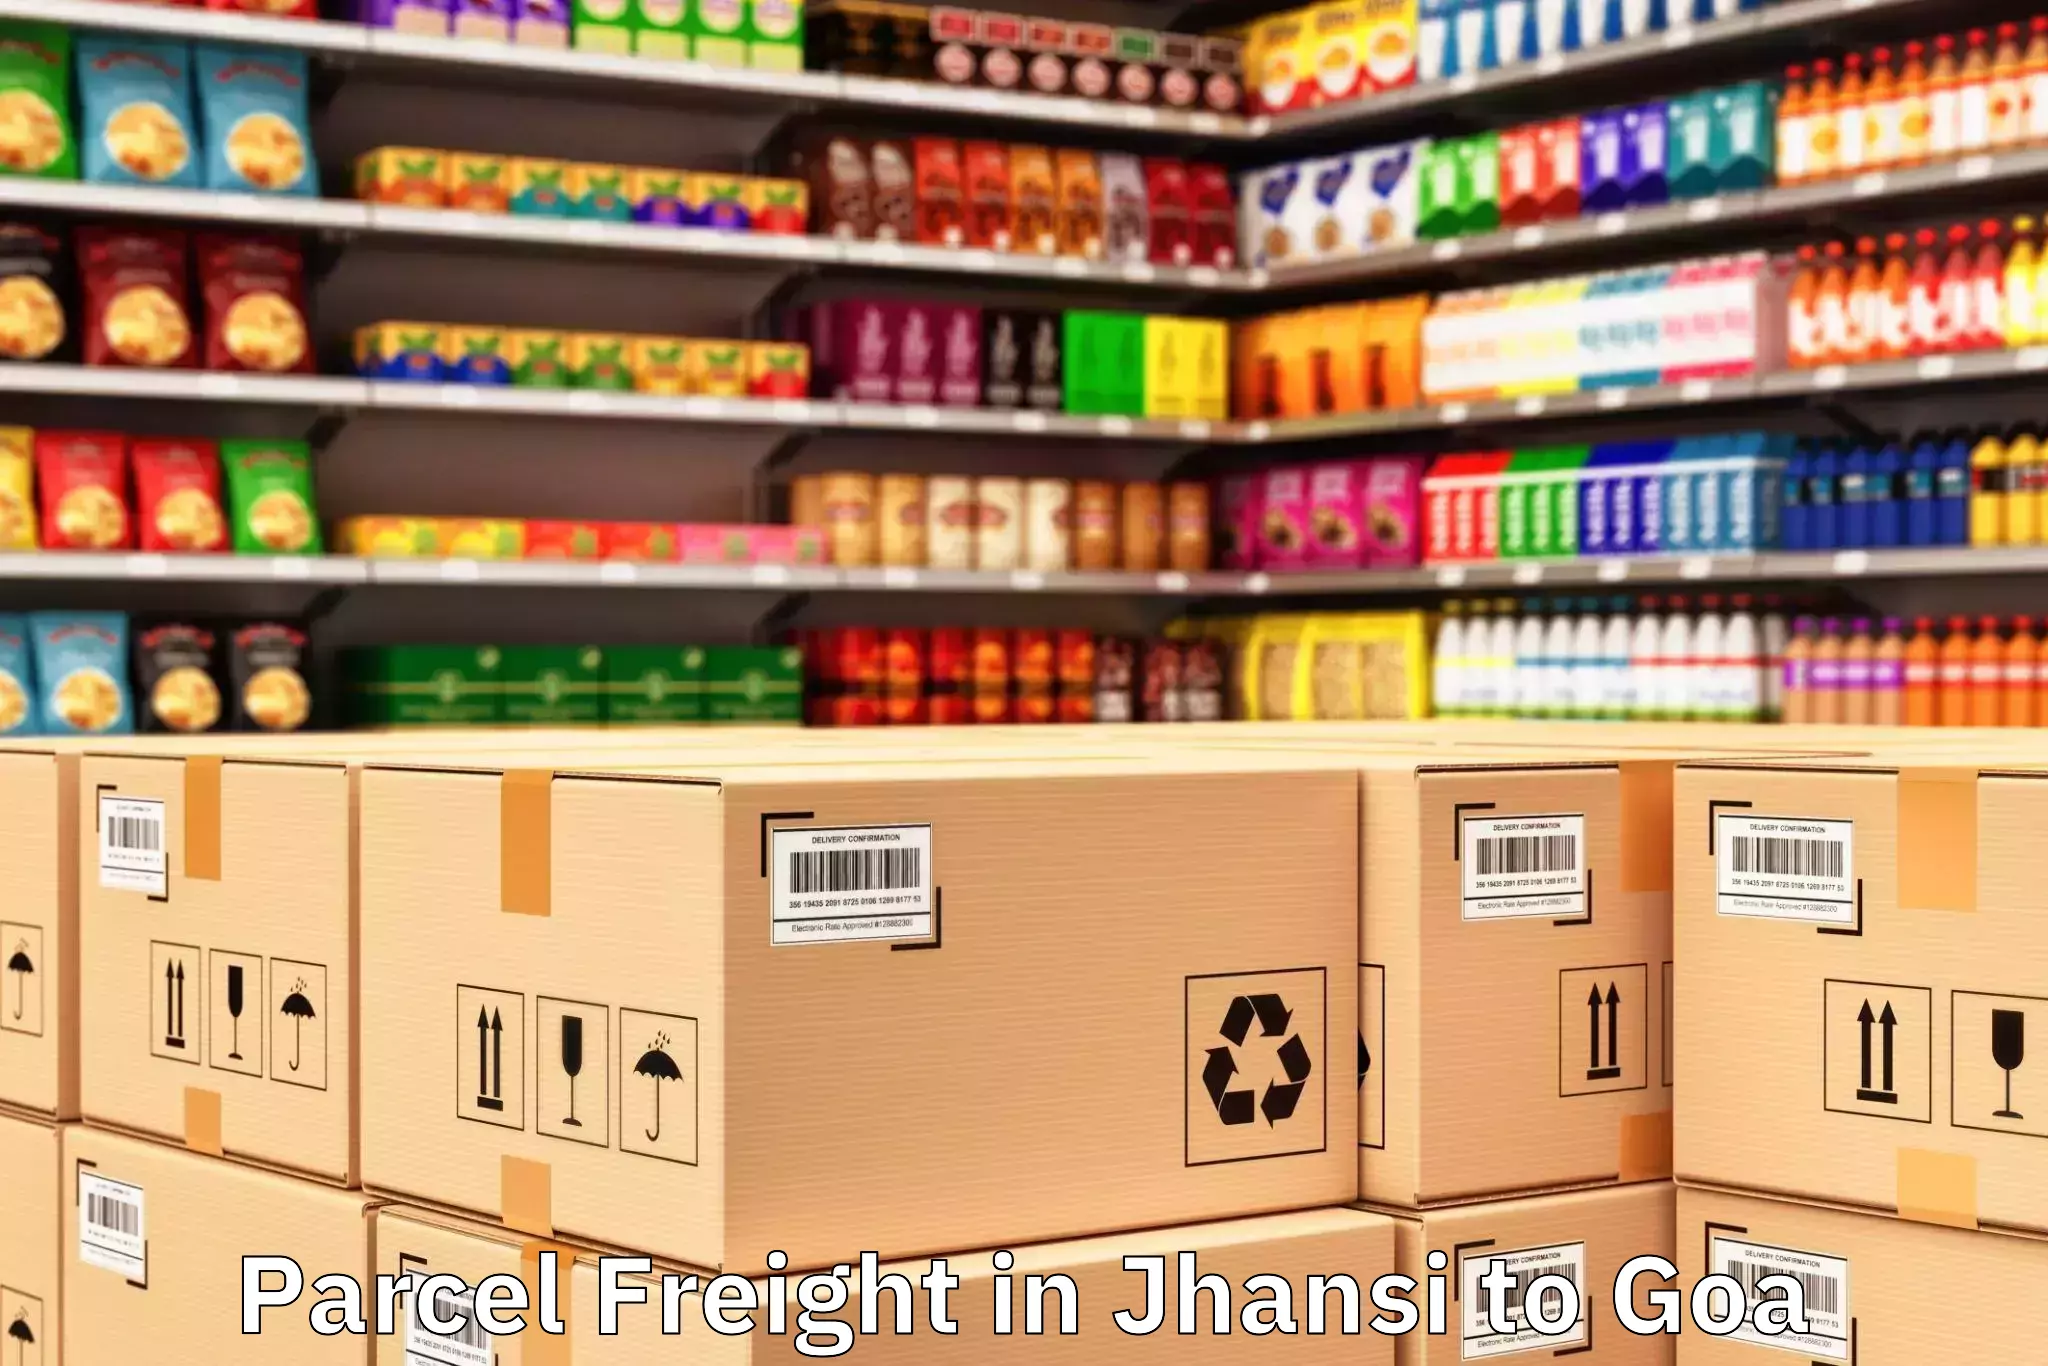 Top Jhansi to Caculo Mall Parcel Freight Available